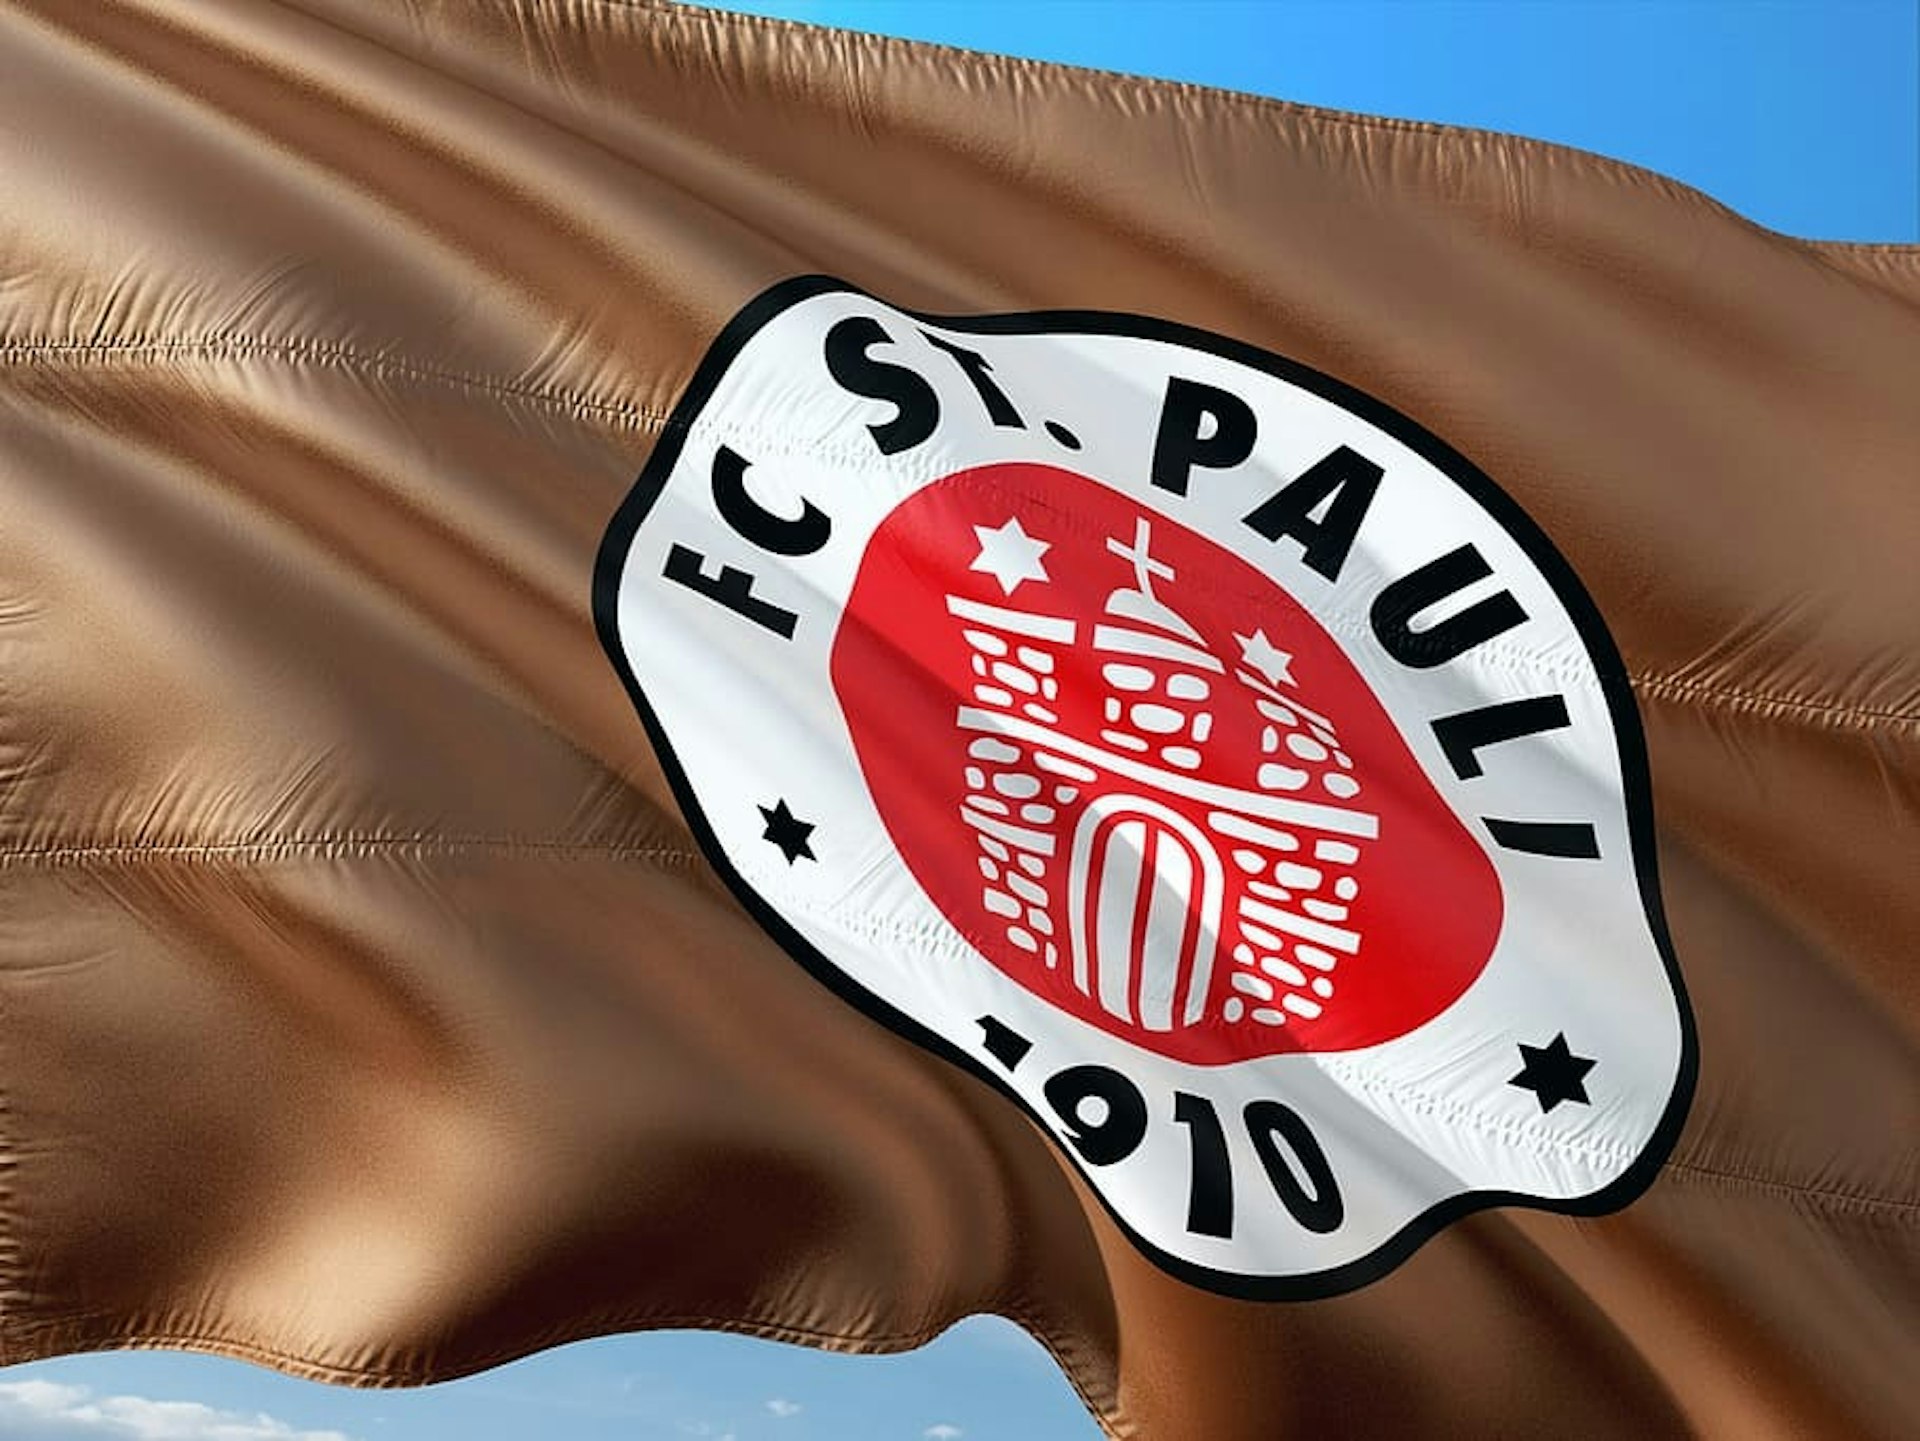 St. Pauli are still fighting fascism with football